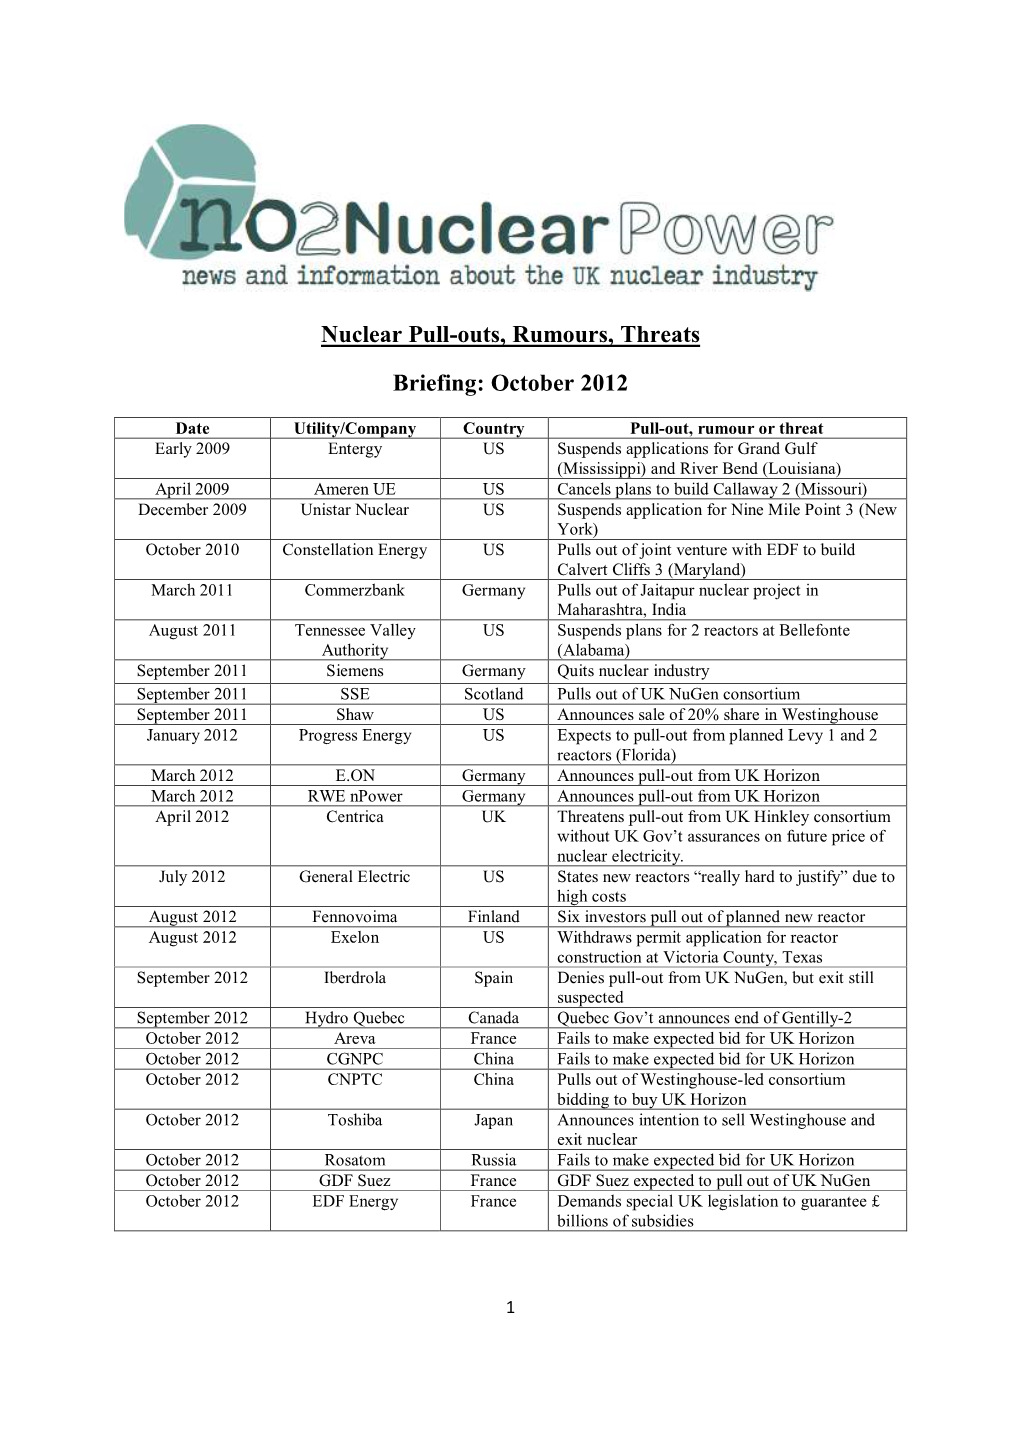 Nuclear Pull-Outs, Rumours, Threats Briefing